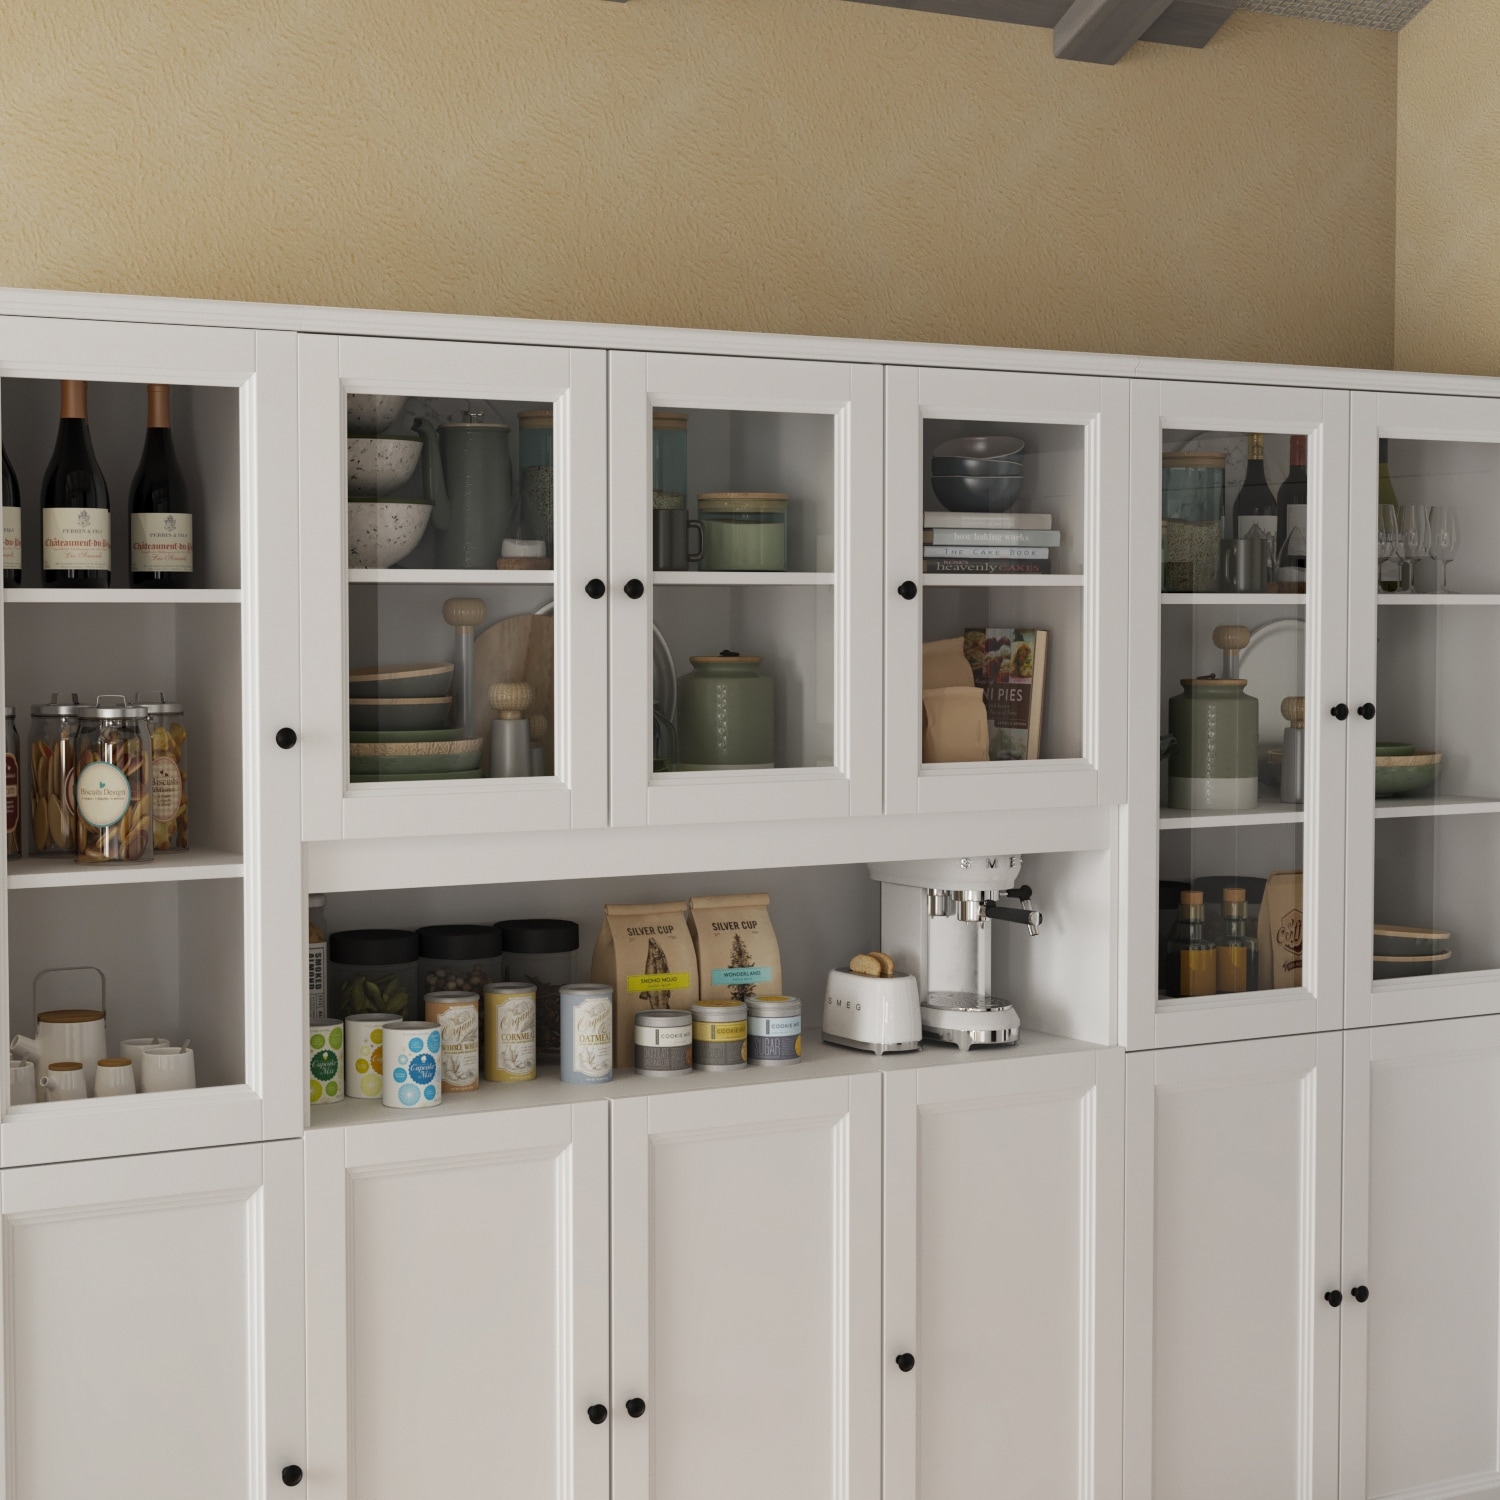 https://ak1.ostkcdn.com/images/products/is/images/direct/6d7c1f9e8624190dd5ee4c445ca7e7c47d5c2069/Pantry-Cabinet-w-Glass-Doors-Glass-Door-Storage-Cabinet-Accent-Cabinet.jpg